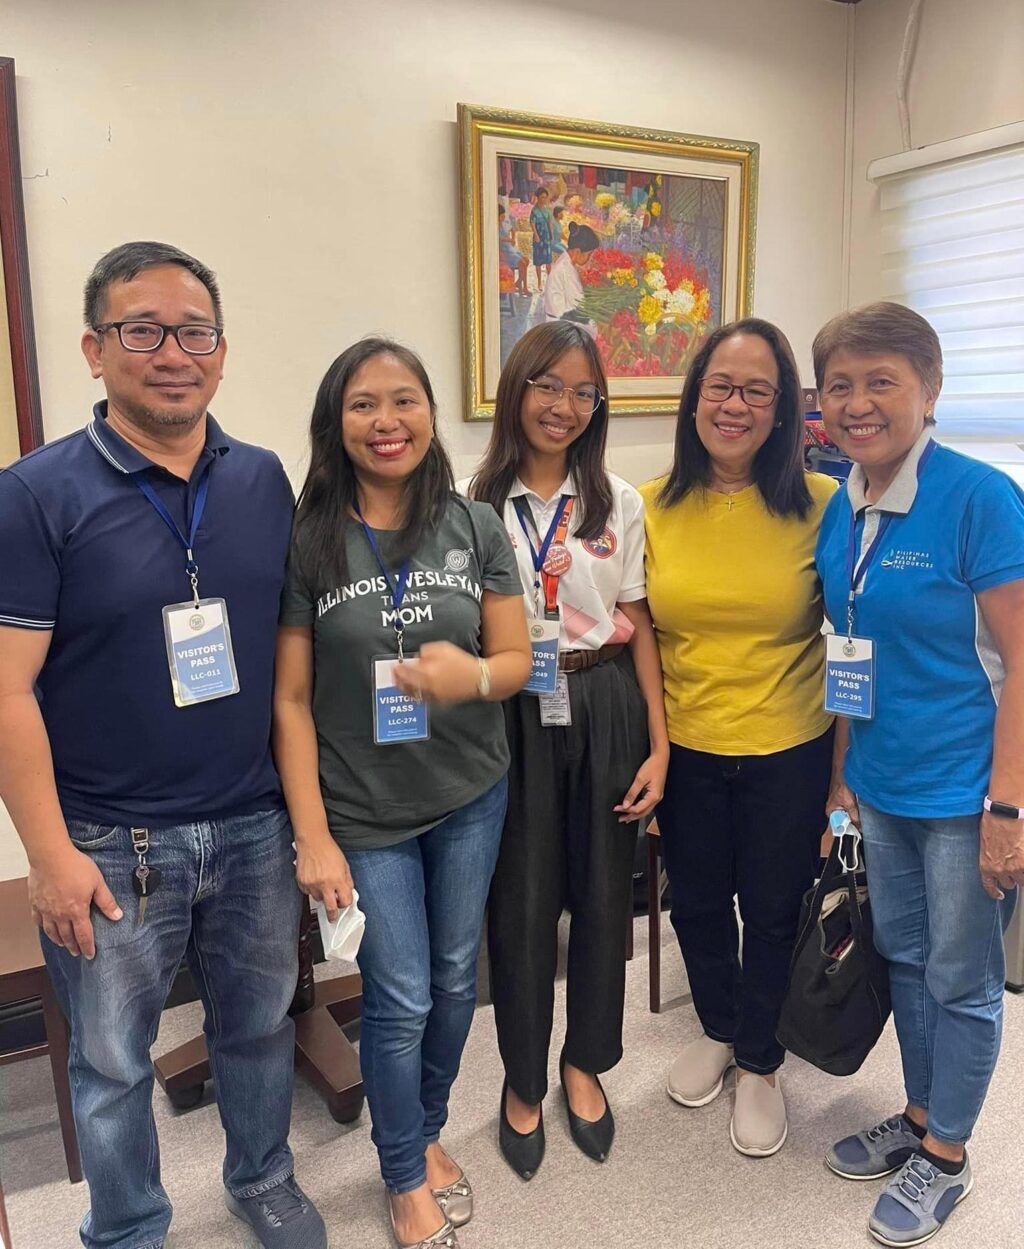 Simone Gabrielle Balaba and her parents visited the office of Lapu-Lapu City Councilor Annabeth Cuizon on Tuesday, April 18.